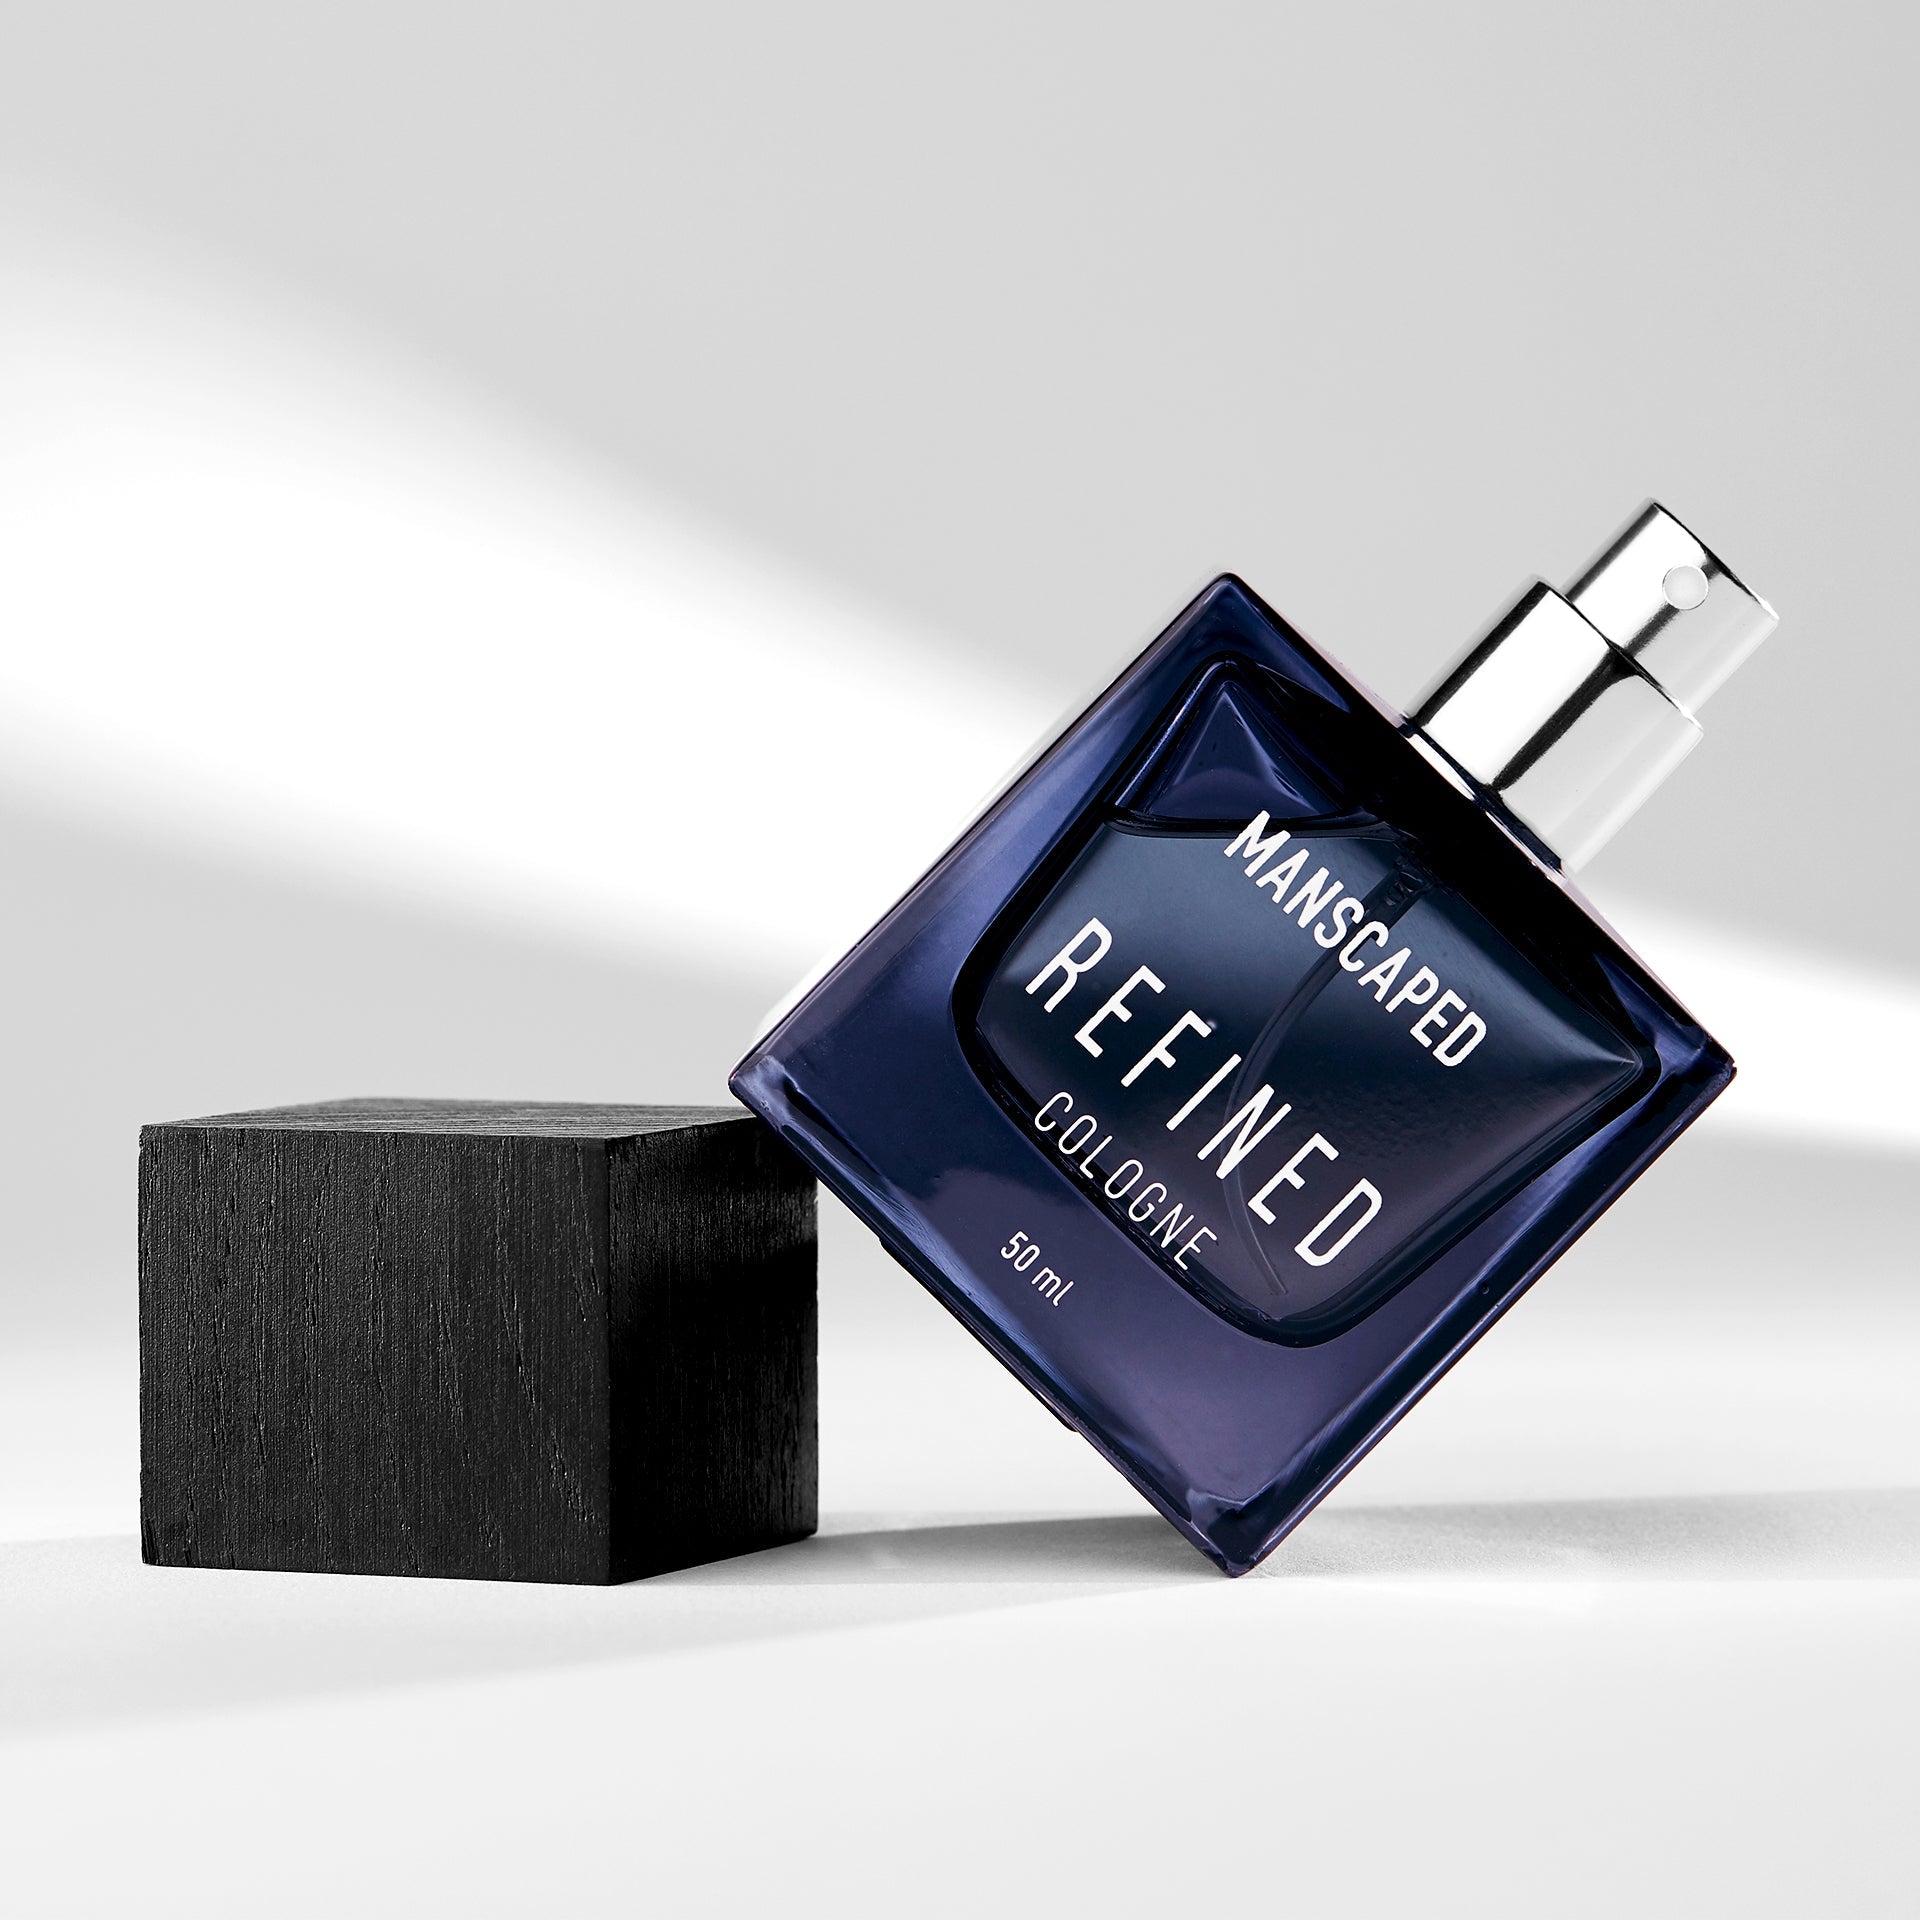 manscaped_cologne_product_2_b7a62512-c7b